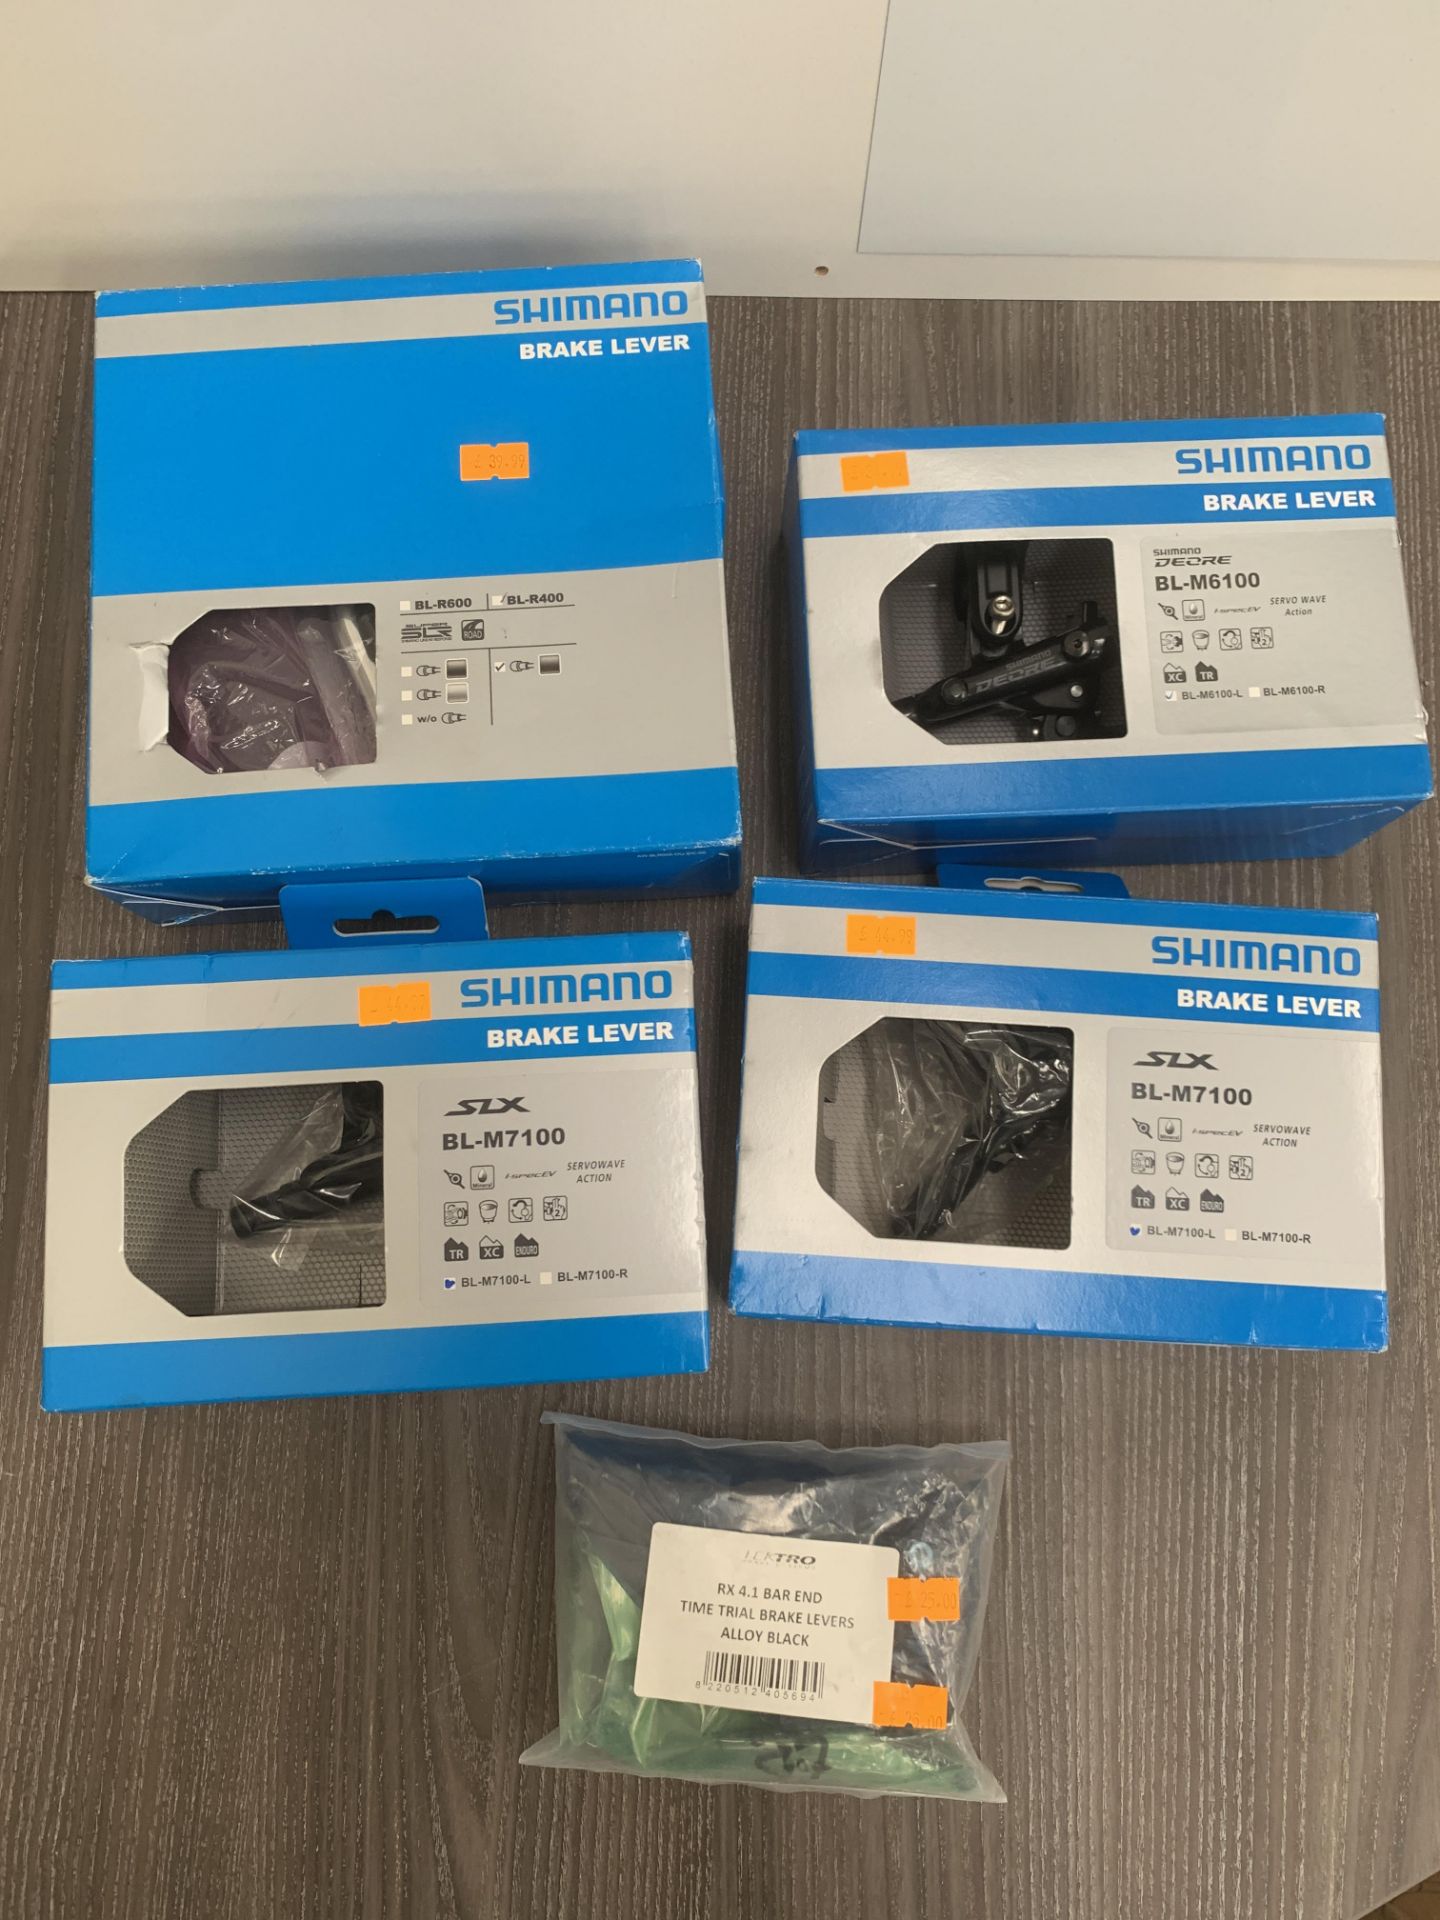 Box of assorted Shimano brake levers including models BL-T8100-R; BL-M7100 (2); BL-M6100; BL-R400 an - Image 2 of 6